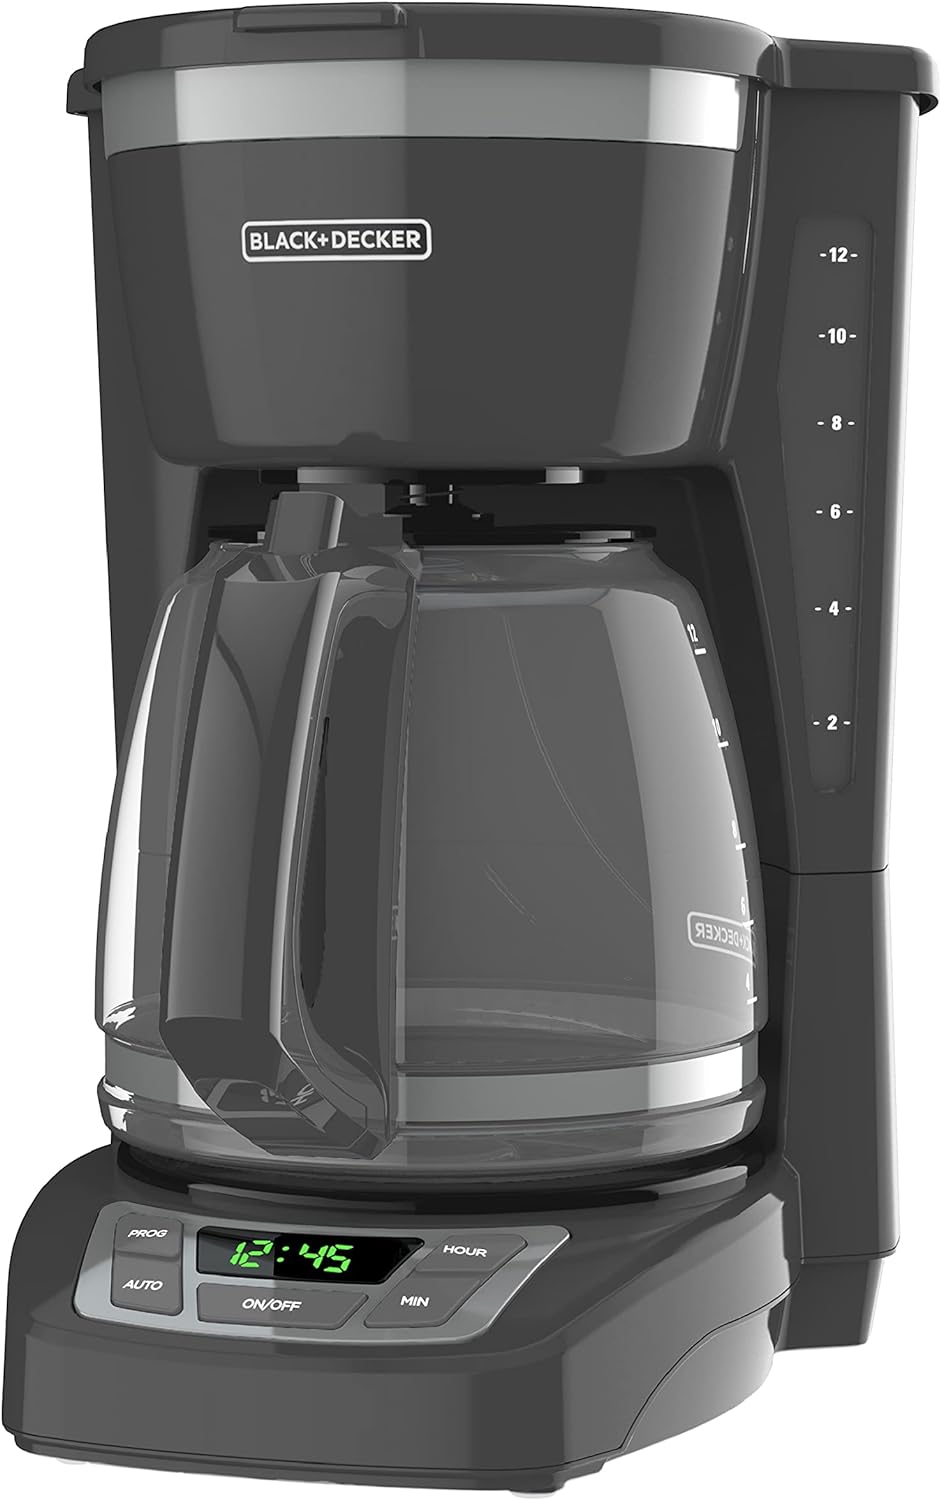 BLACK DECKER 12-Cup Digital Coffee Maker, CM1165GY, Programmable, Washable Basket Filter, Sneak-A-Cup, Auto Brew, Water Window, Keep Hot Plate, Grey